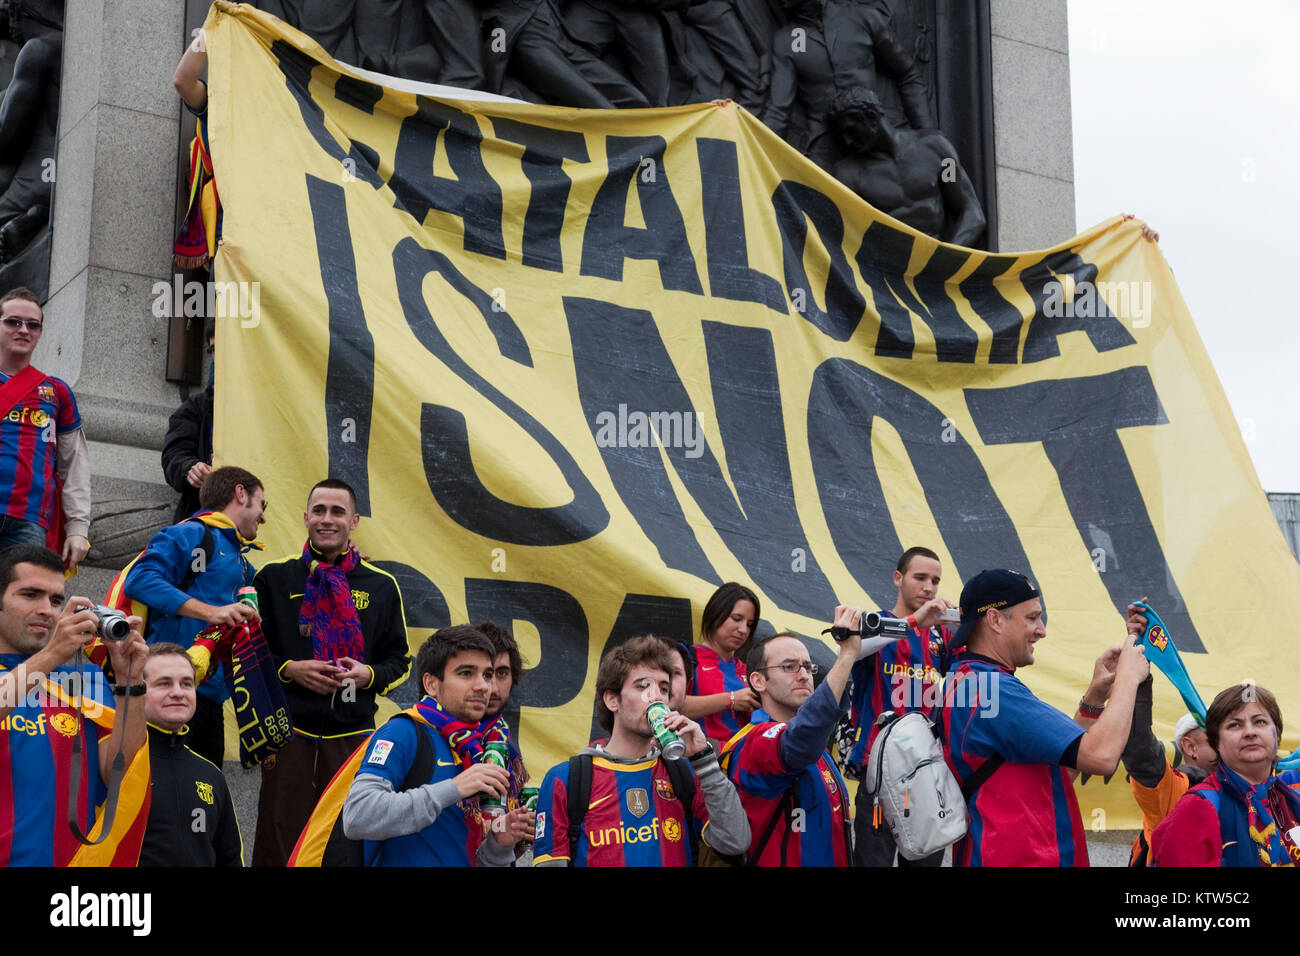 Barca fans in Trafalgar Square before the kick-off of the Champions League Final between FC Barcelona and Manchester United. A large banner goes up 'Catalonia is not Spain' behind some football fans to make a political protest. Stock Photo